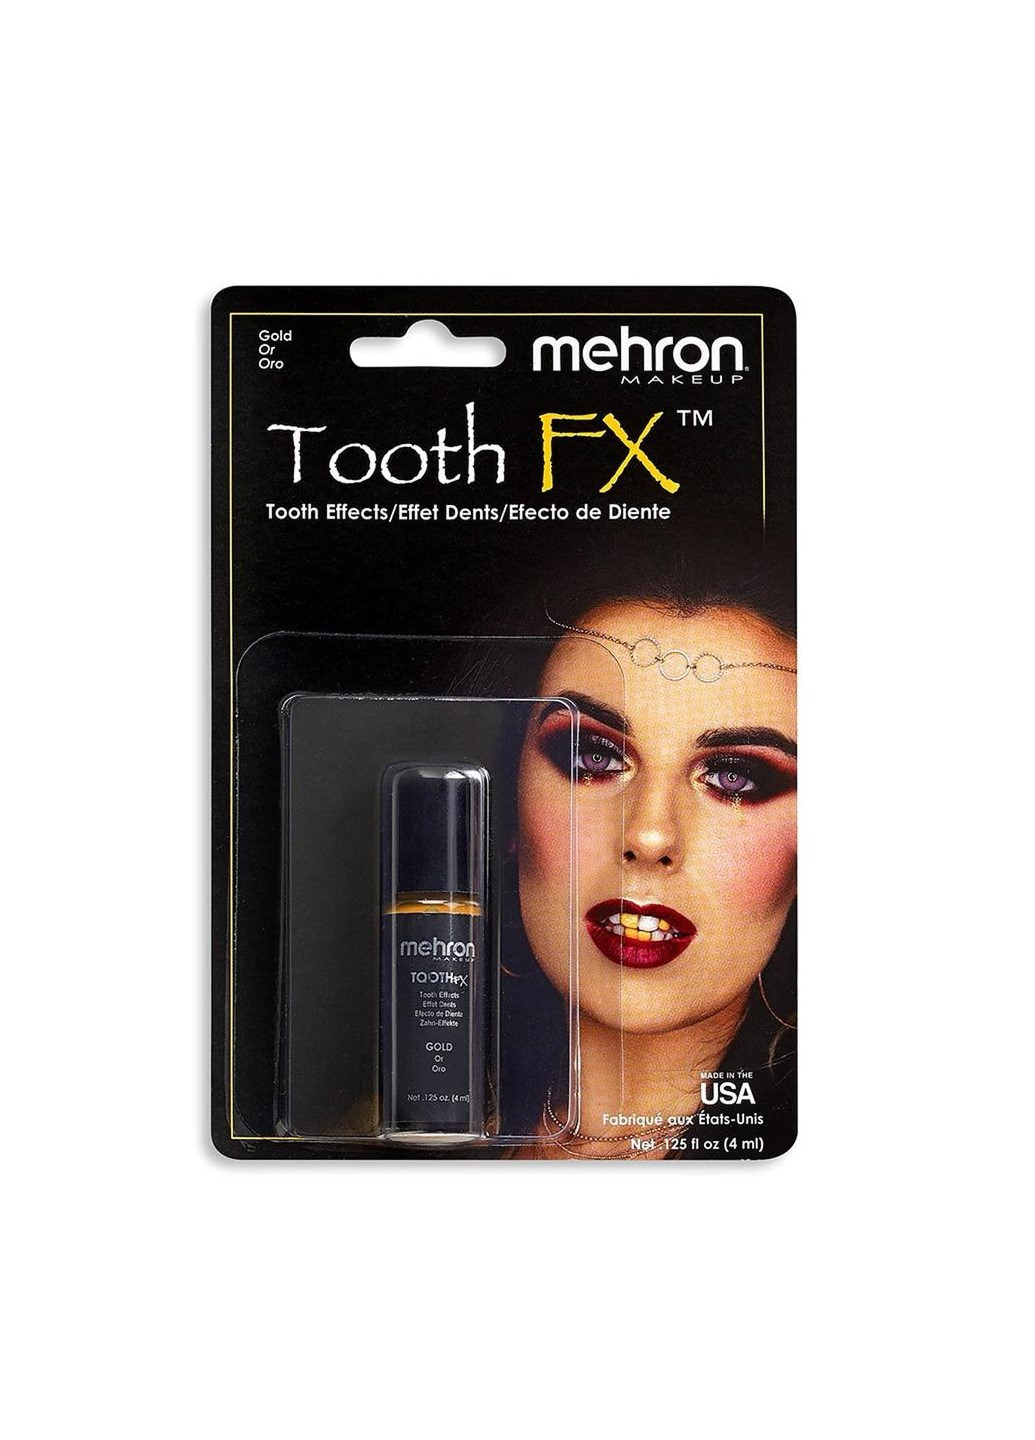 Фарба для зубів Tooth FX with Brush for Special Effects - Gold (Золота), 4 мл Mehron (205593373)